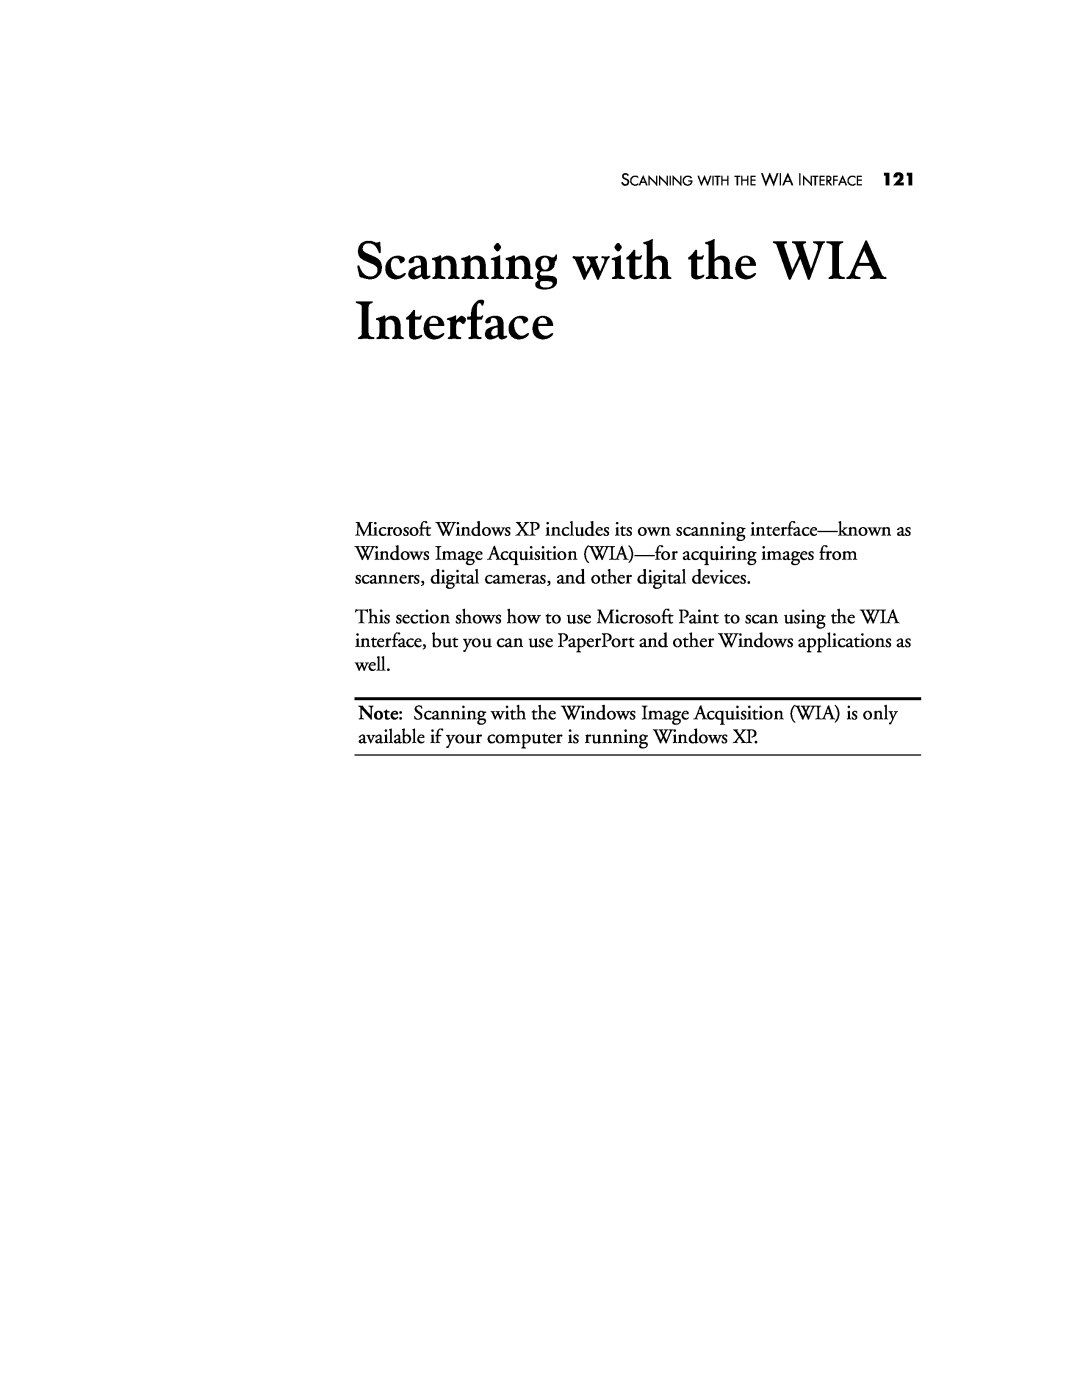 Visioneer 9750 manual Scanning with the WIA Interface, Scanning With The Wia Interface 